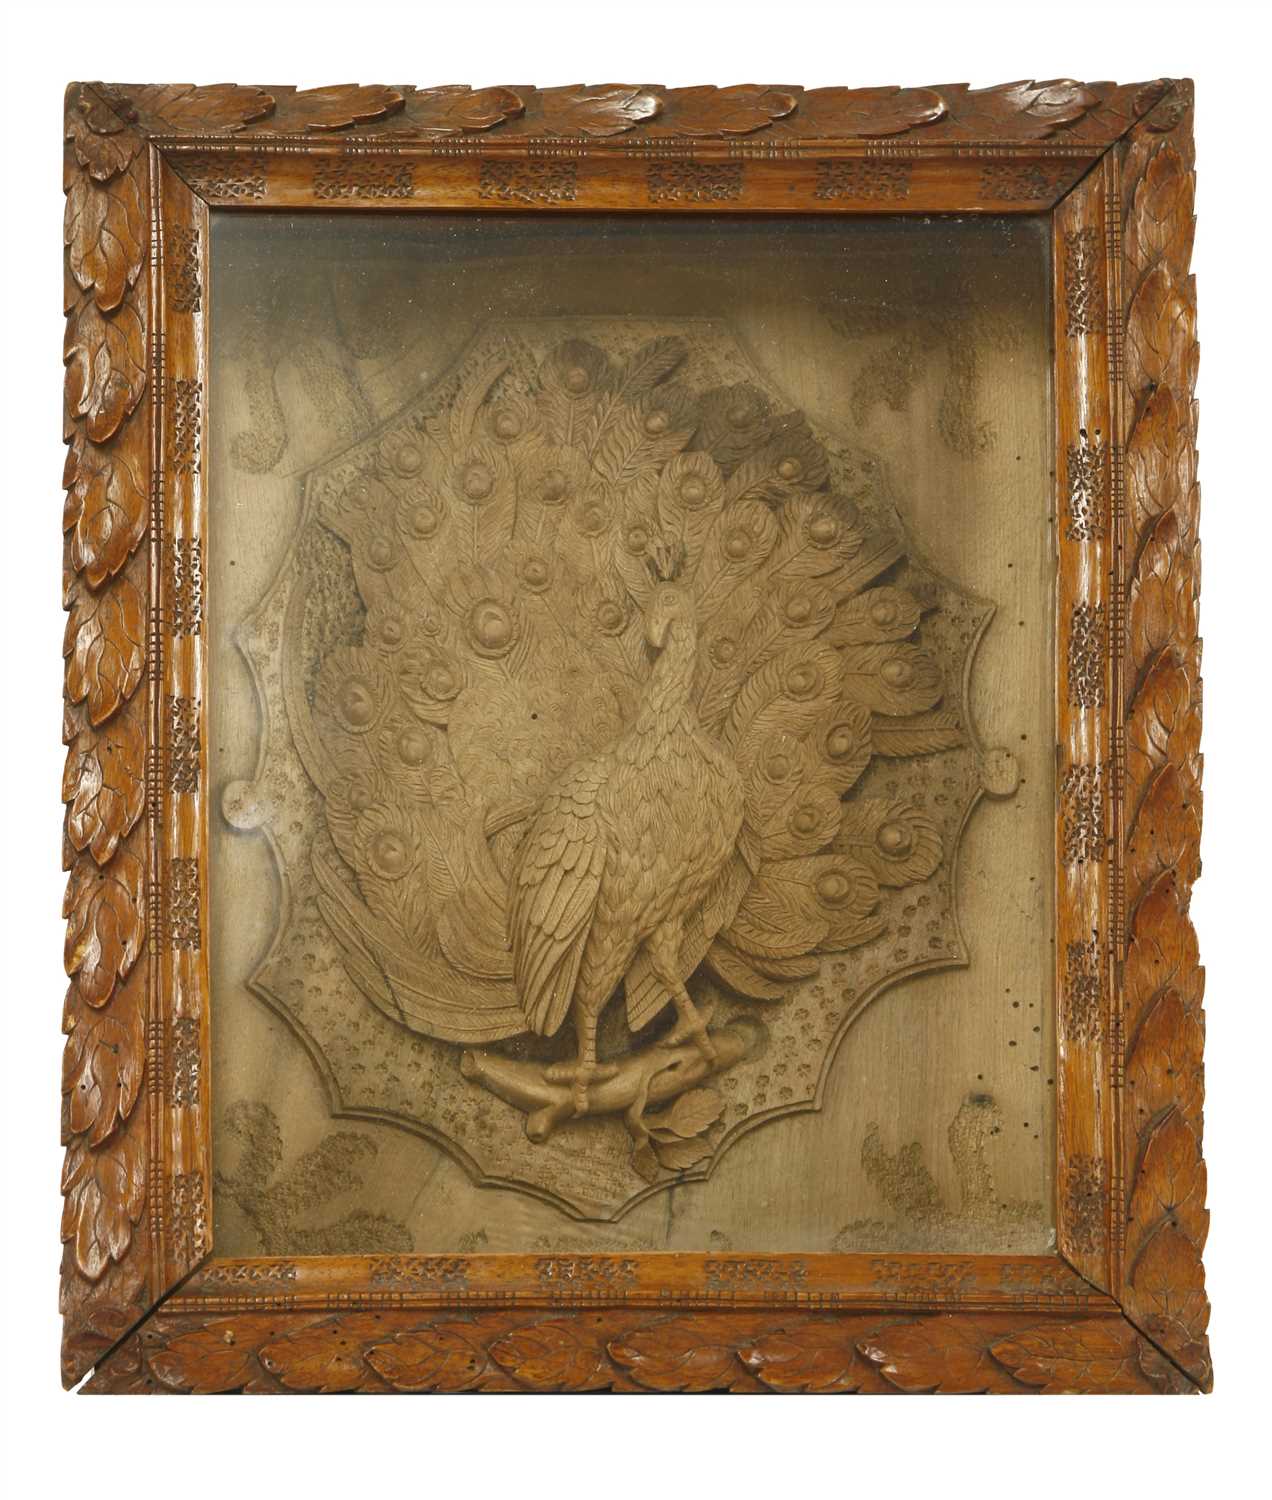 Lot 431 - A limewood(?) carving of a peacock